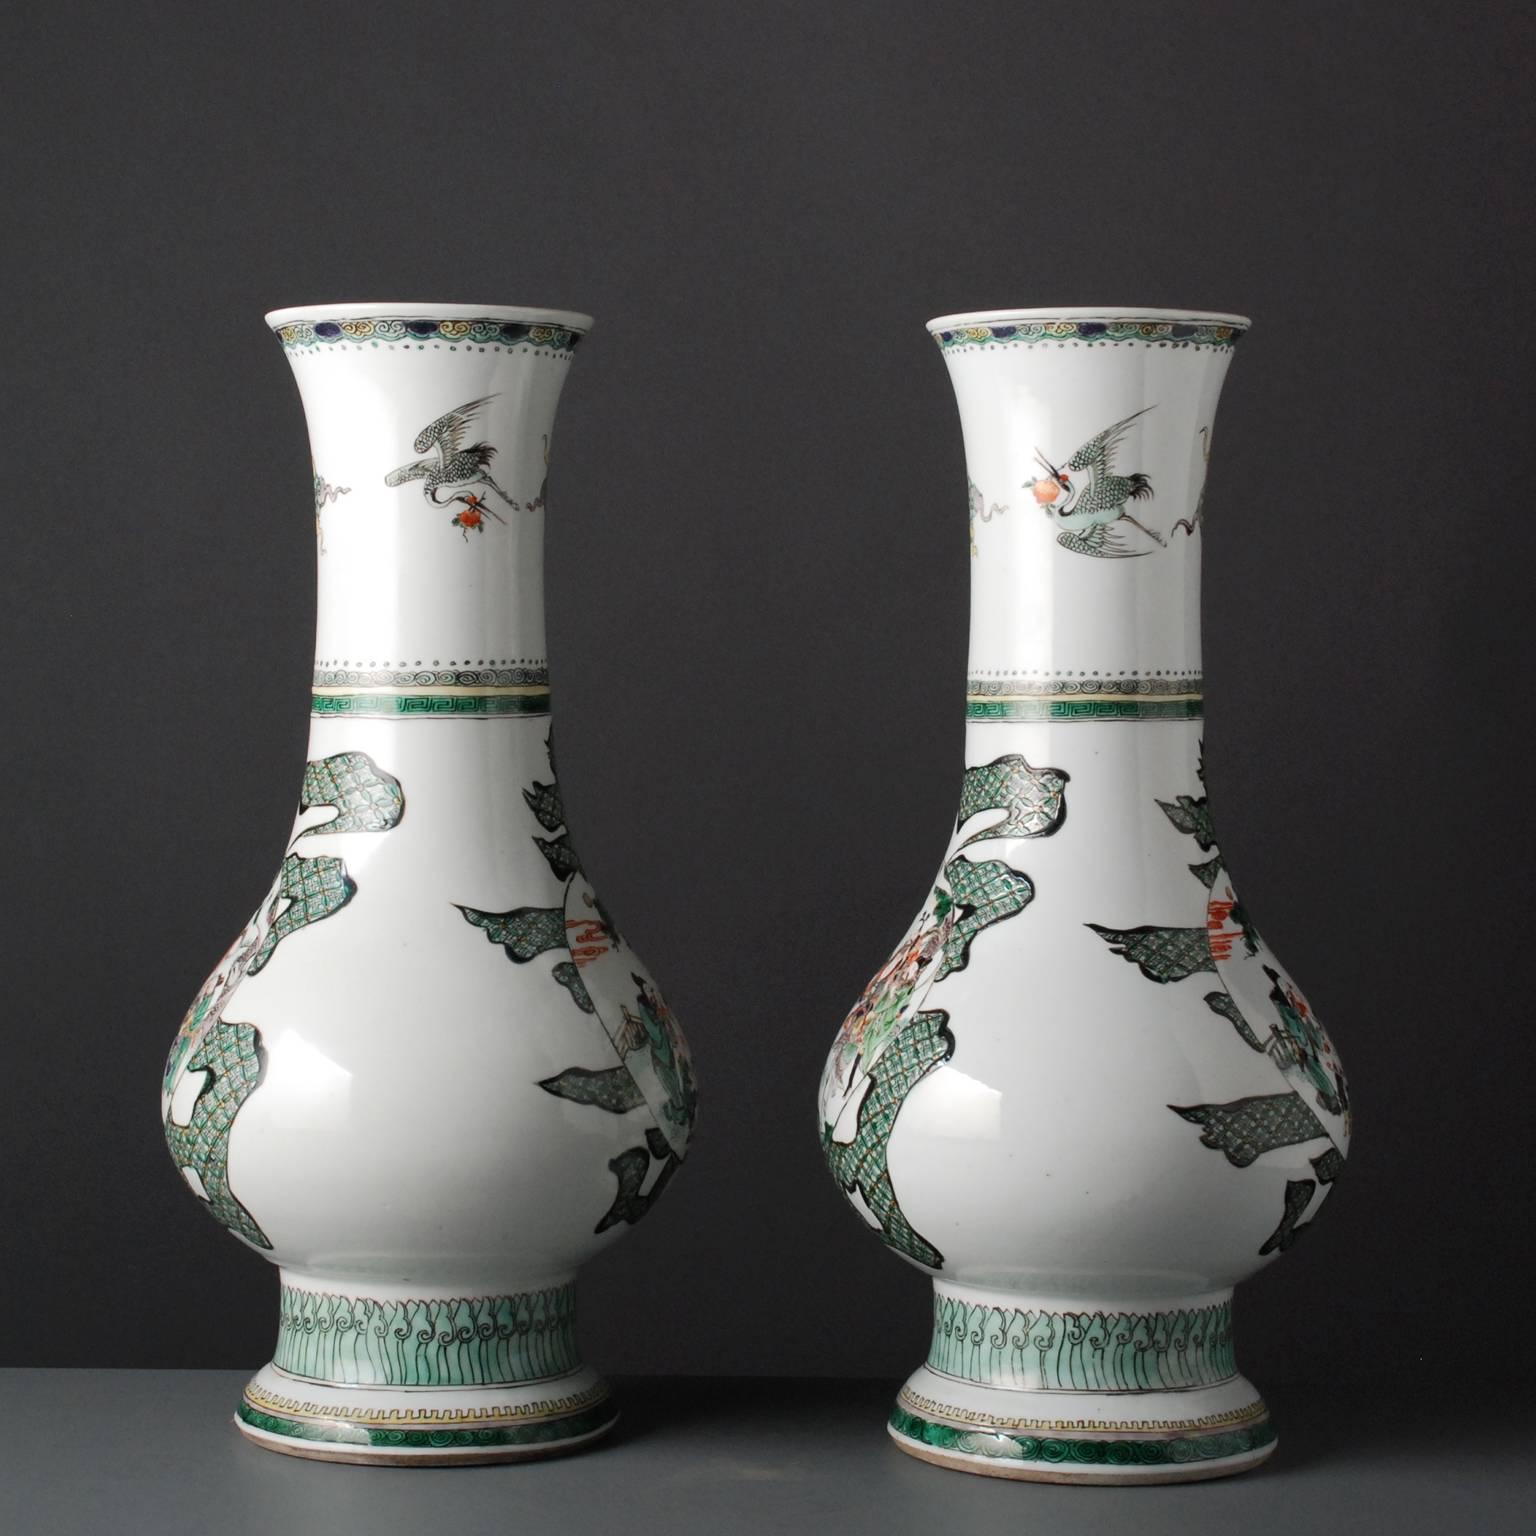 This pair of vases is a personal favorite as they have a wonderful provenance. 
They were in the collection of J. Pierpont Morgan, in 1904 When Morgan purchased a large collection of Chinese porcelain from the famous collector James Garland. His